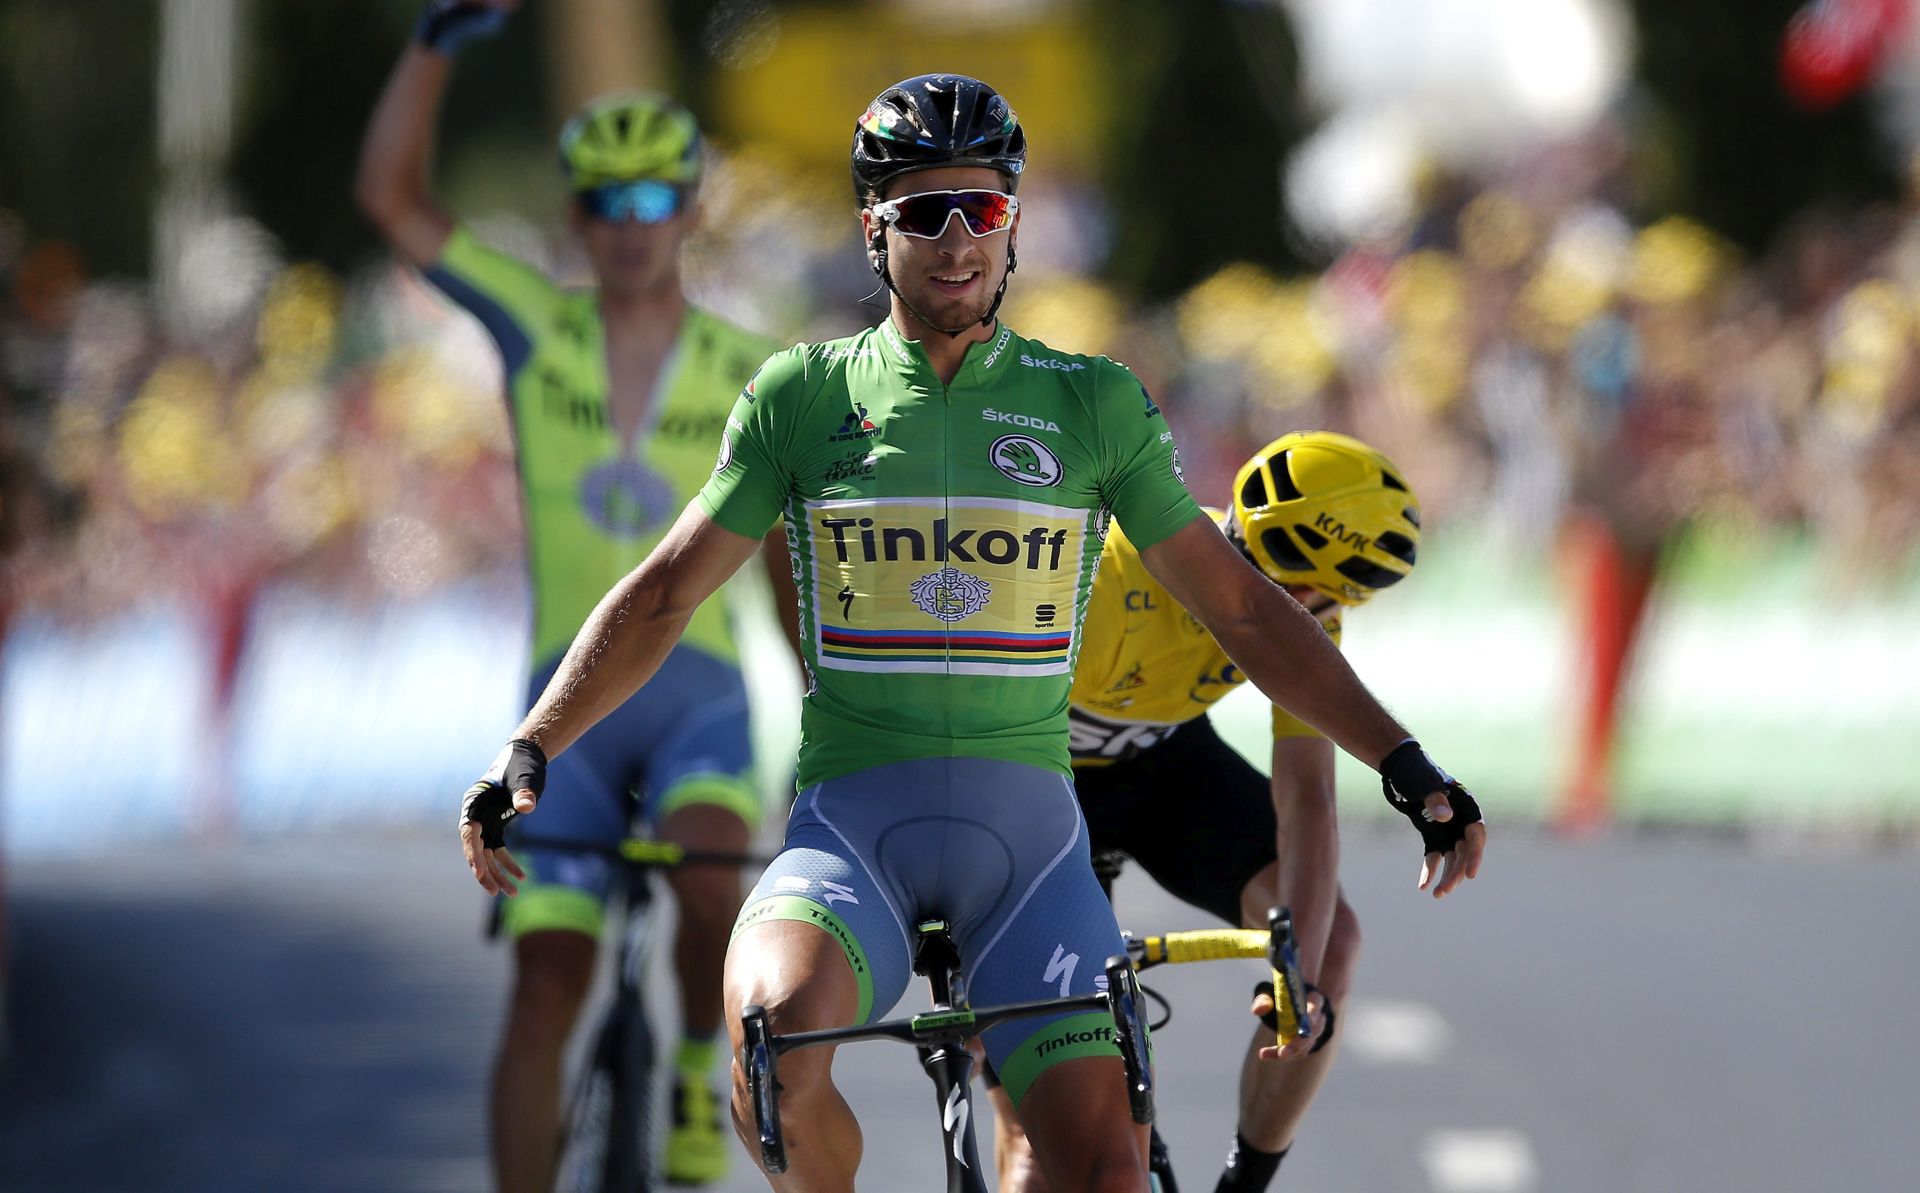 epa05423189 Tinkoff team rider Peter Sagan of Slovakia celebrates winning the 11th stage of the 103rd edition of the Tour de France cycling race over 162.5km between Carcassonne and Montpellier, France, 13 July 2016.  EPA/YOAN VALAT